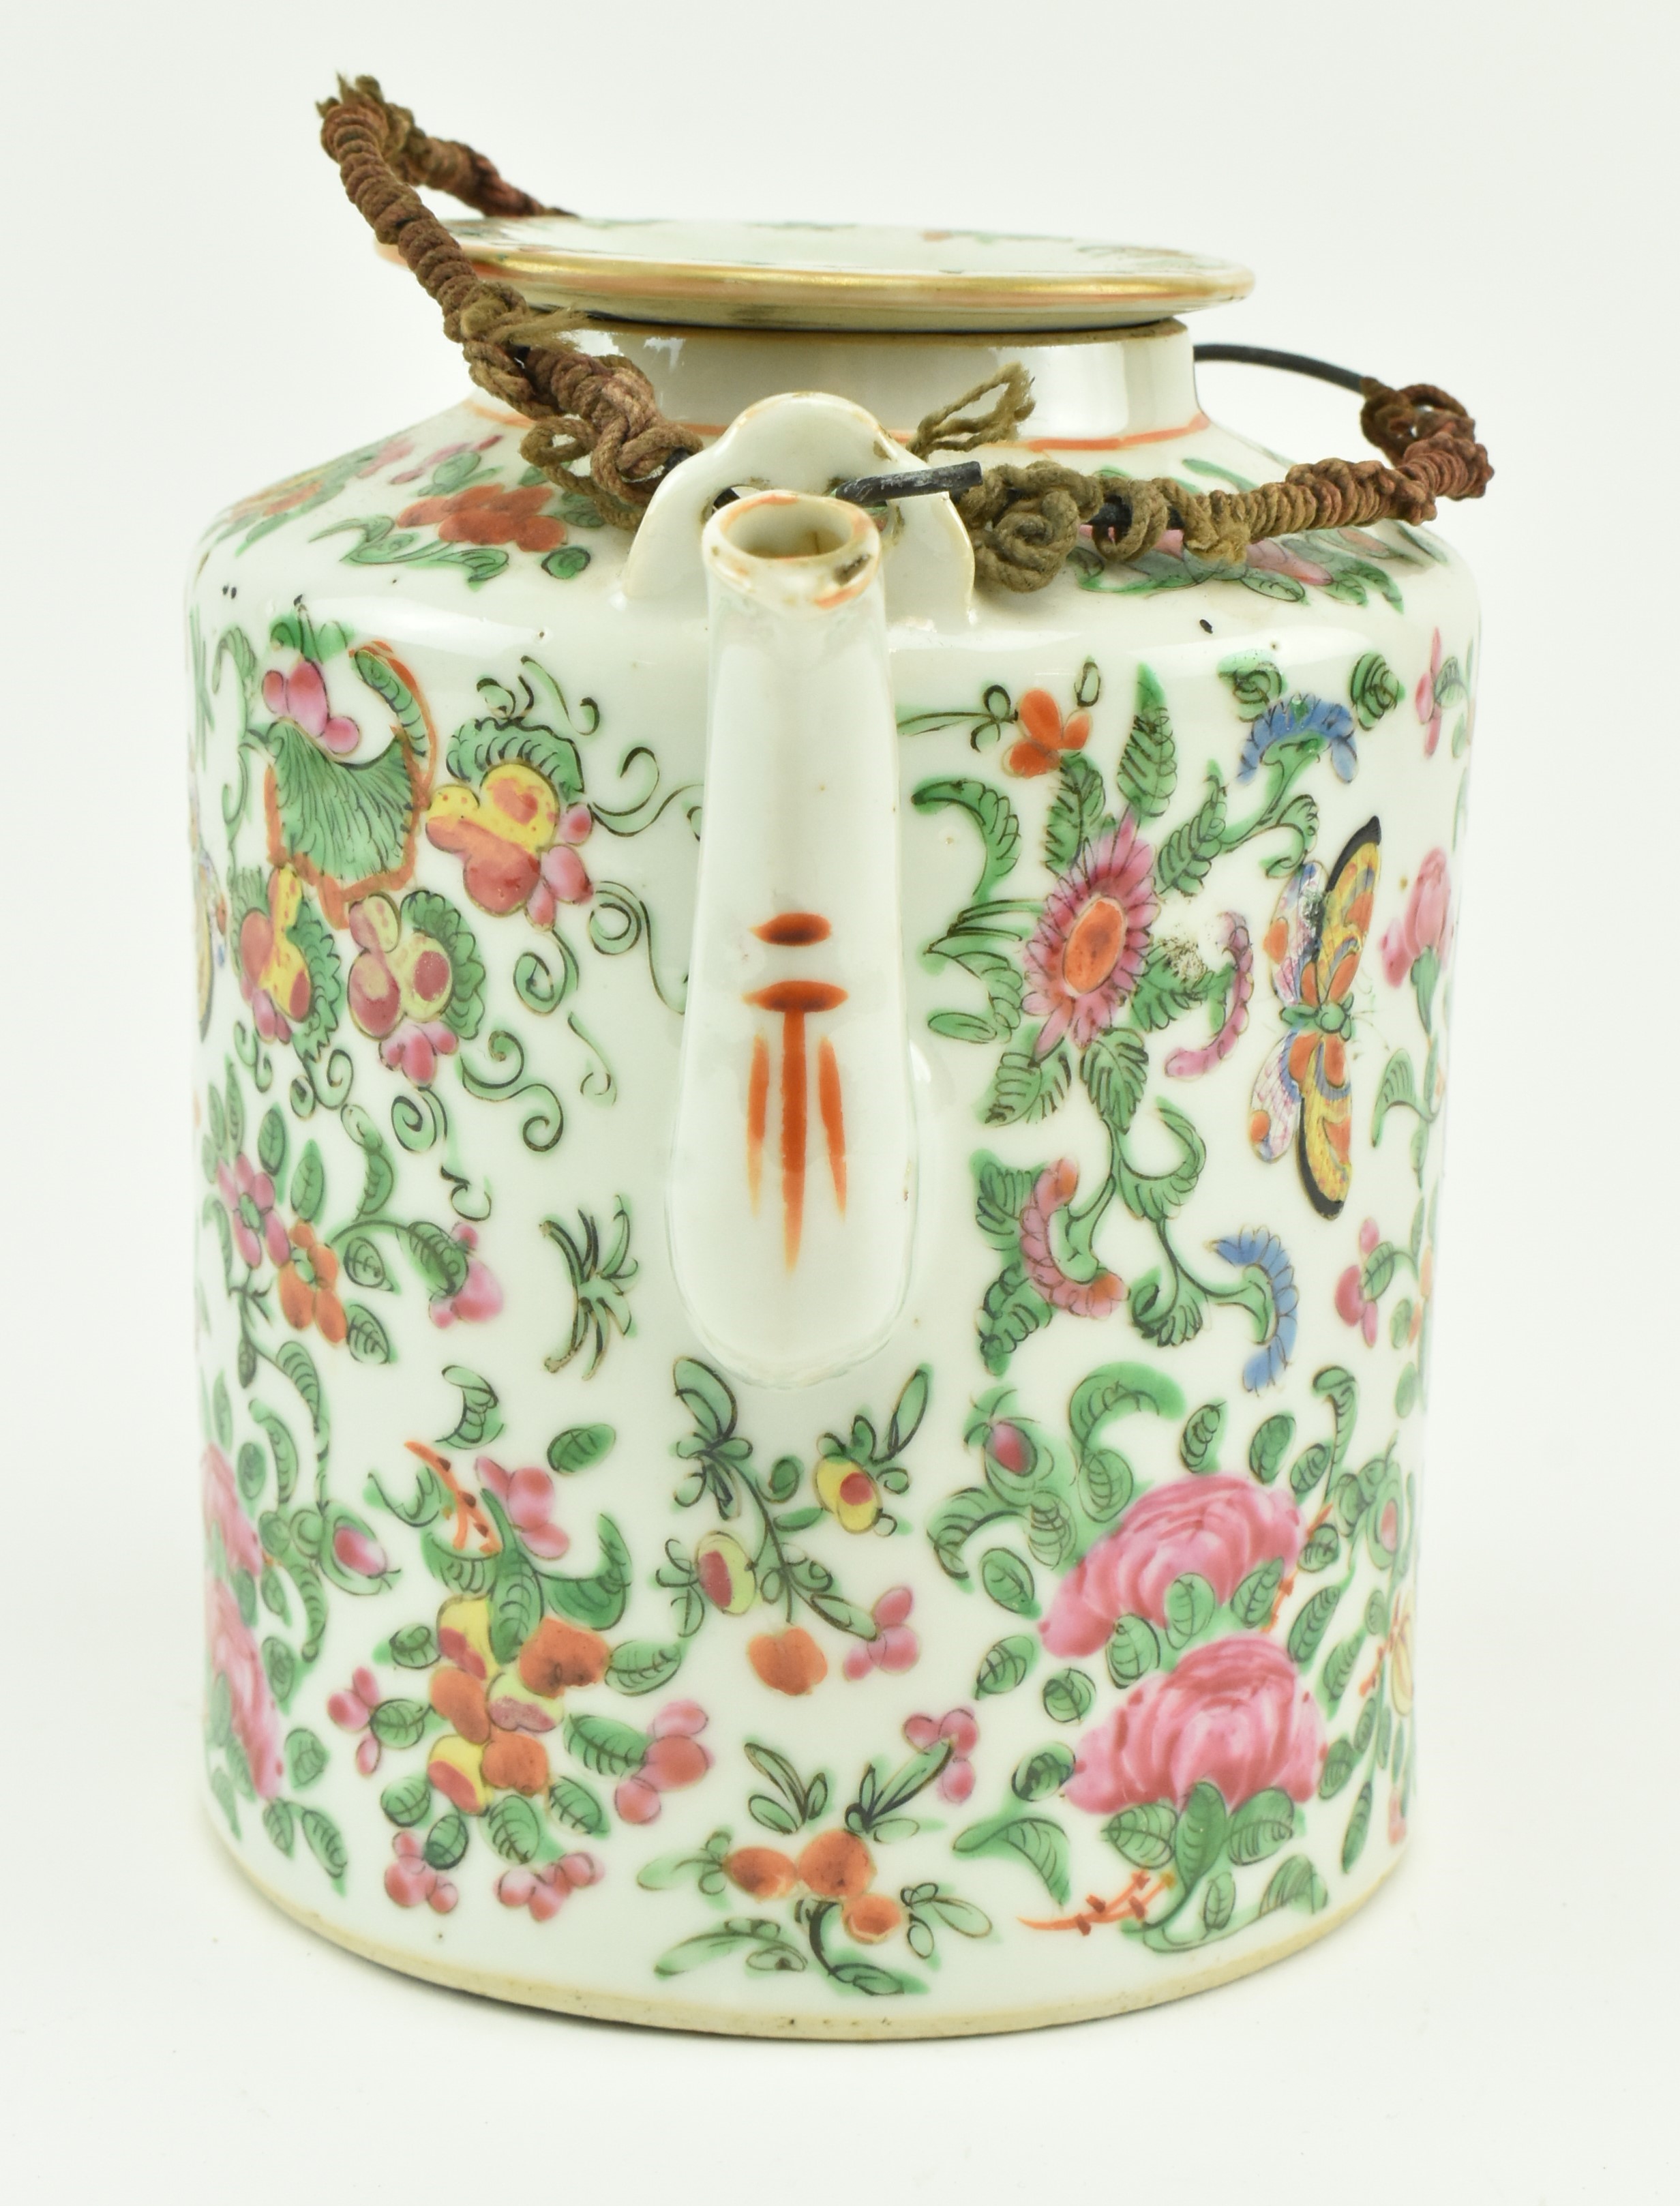 20TH CENTURY FAMILLE ROSE FLOWERS AND BIRDS HANDLED TEAPOT - Image 3 of 5